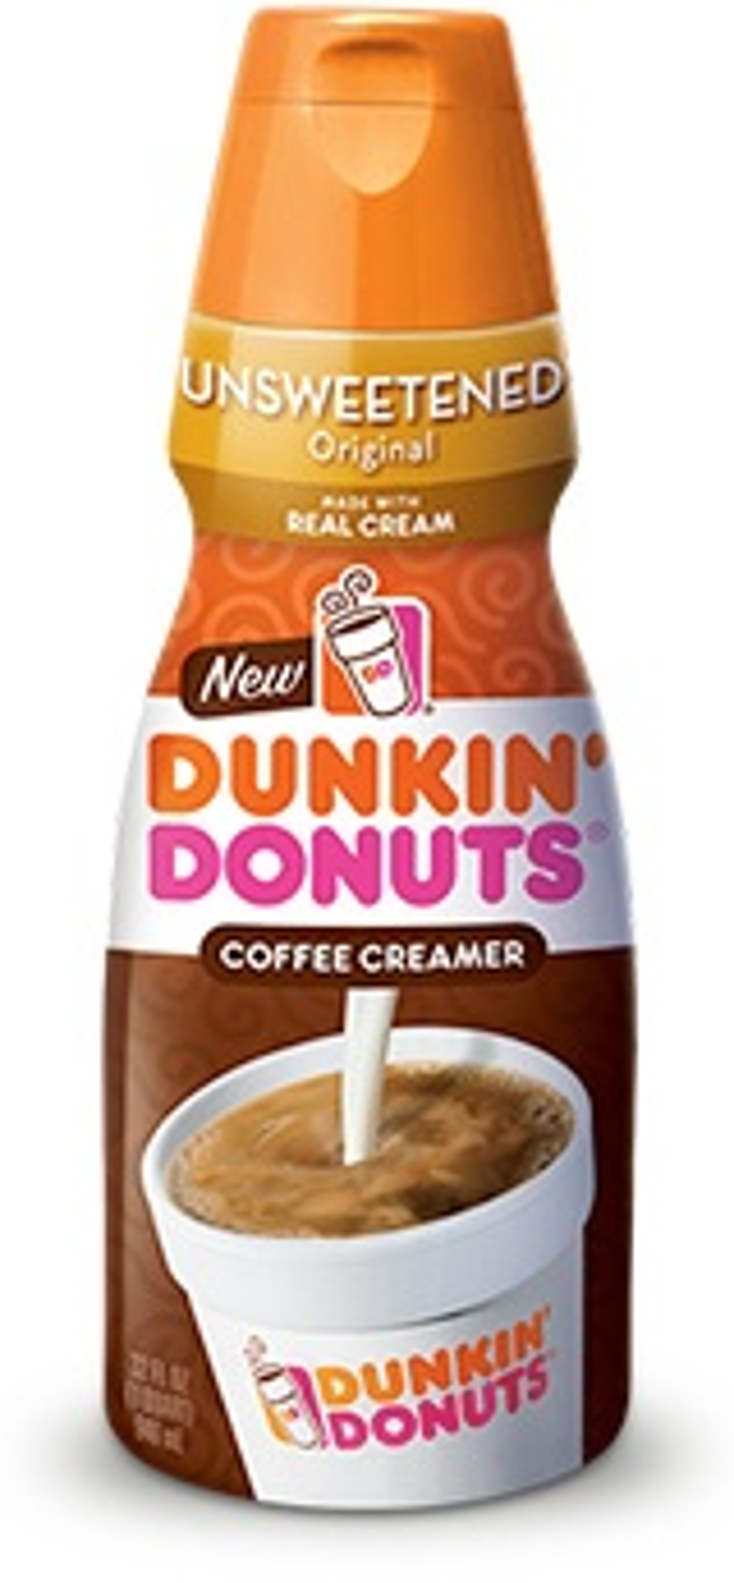 Dunkin’ Donuts Adds to Coffee Line